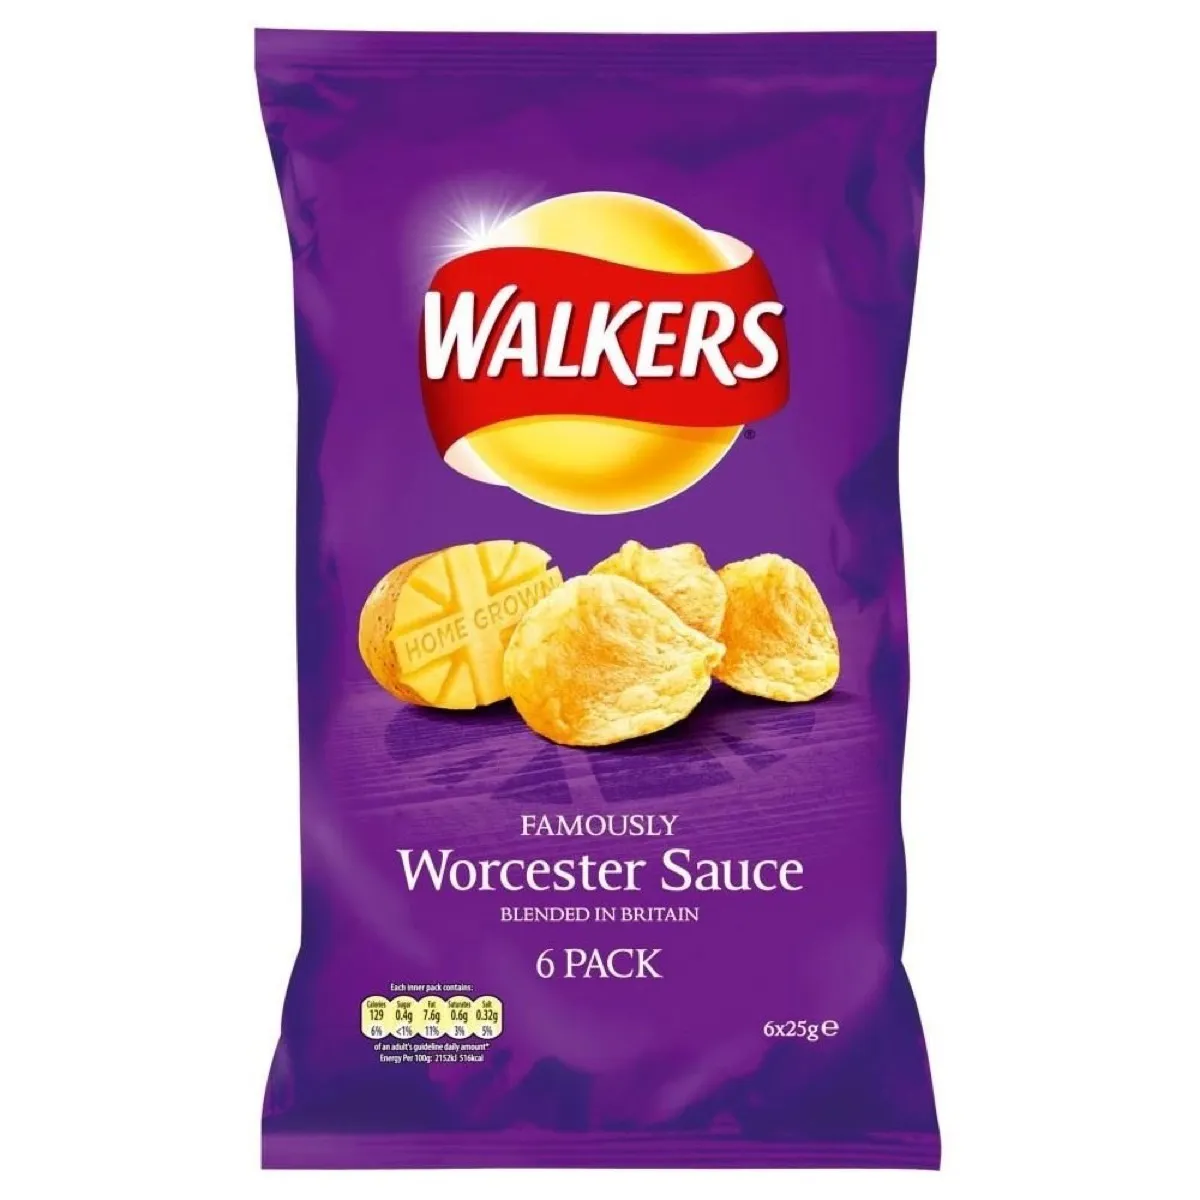 Walker's Crisps are Lay's {Brands with Different Names Abroad}